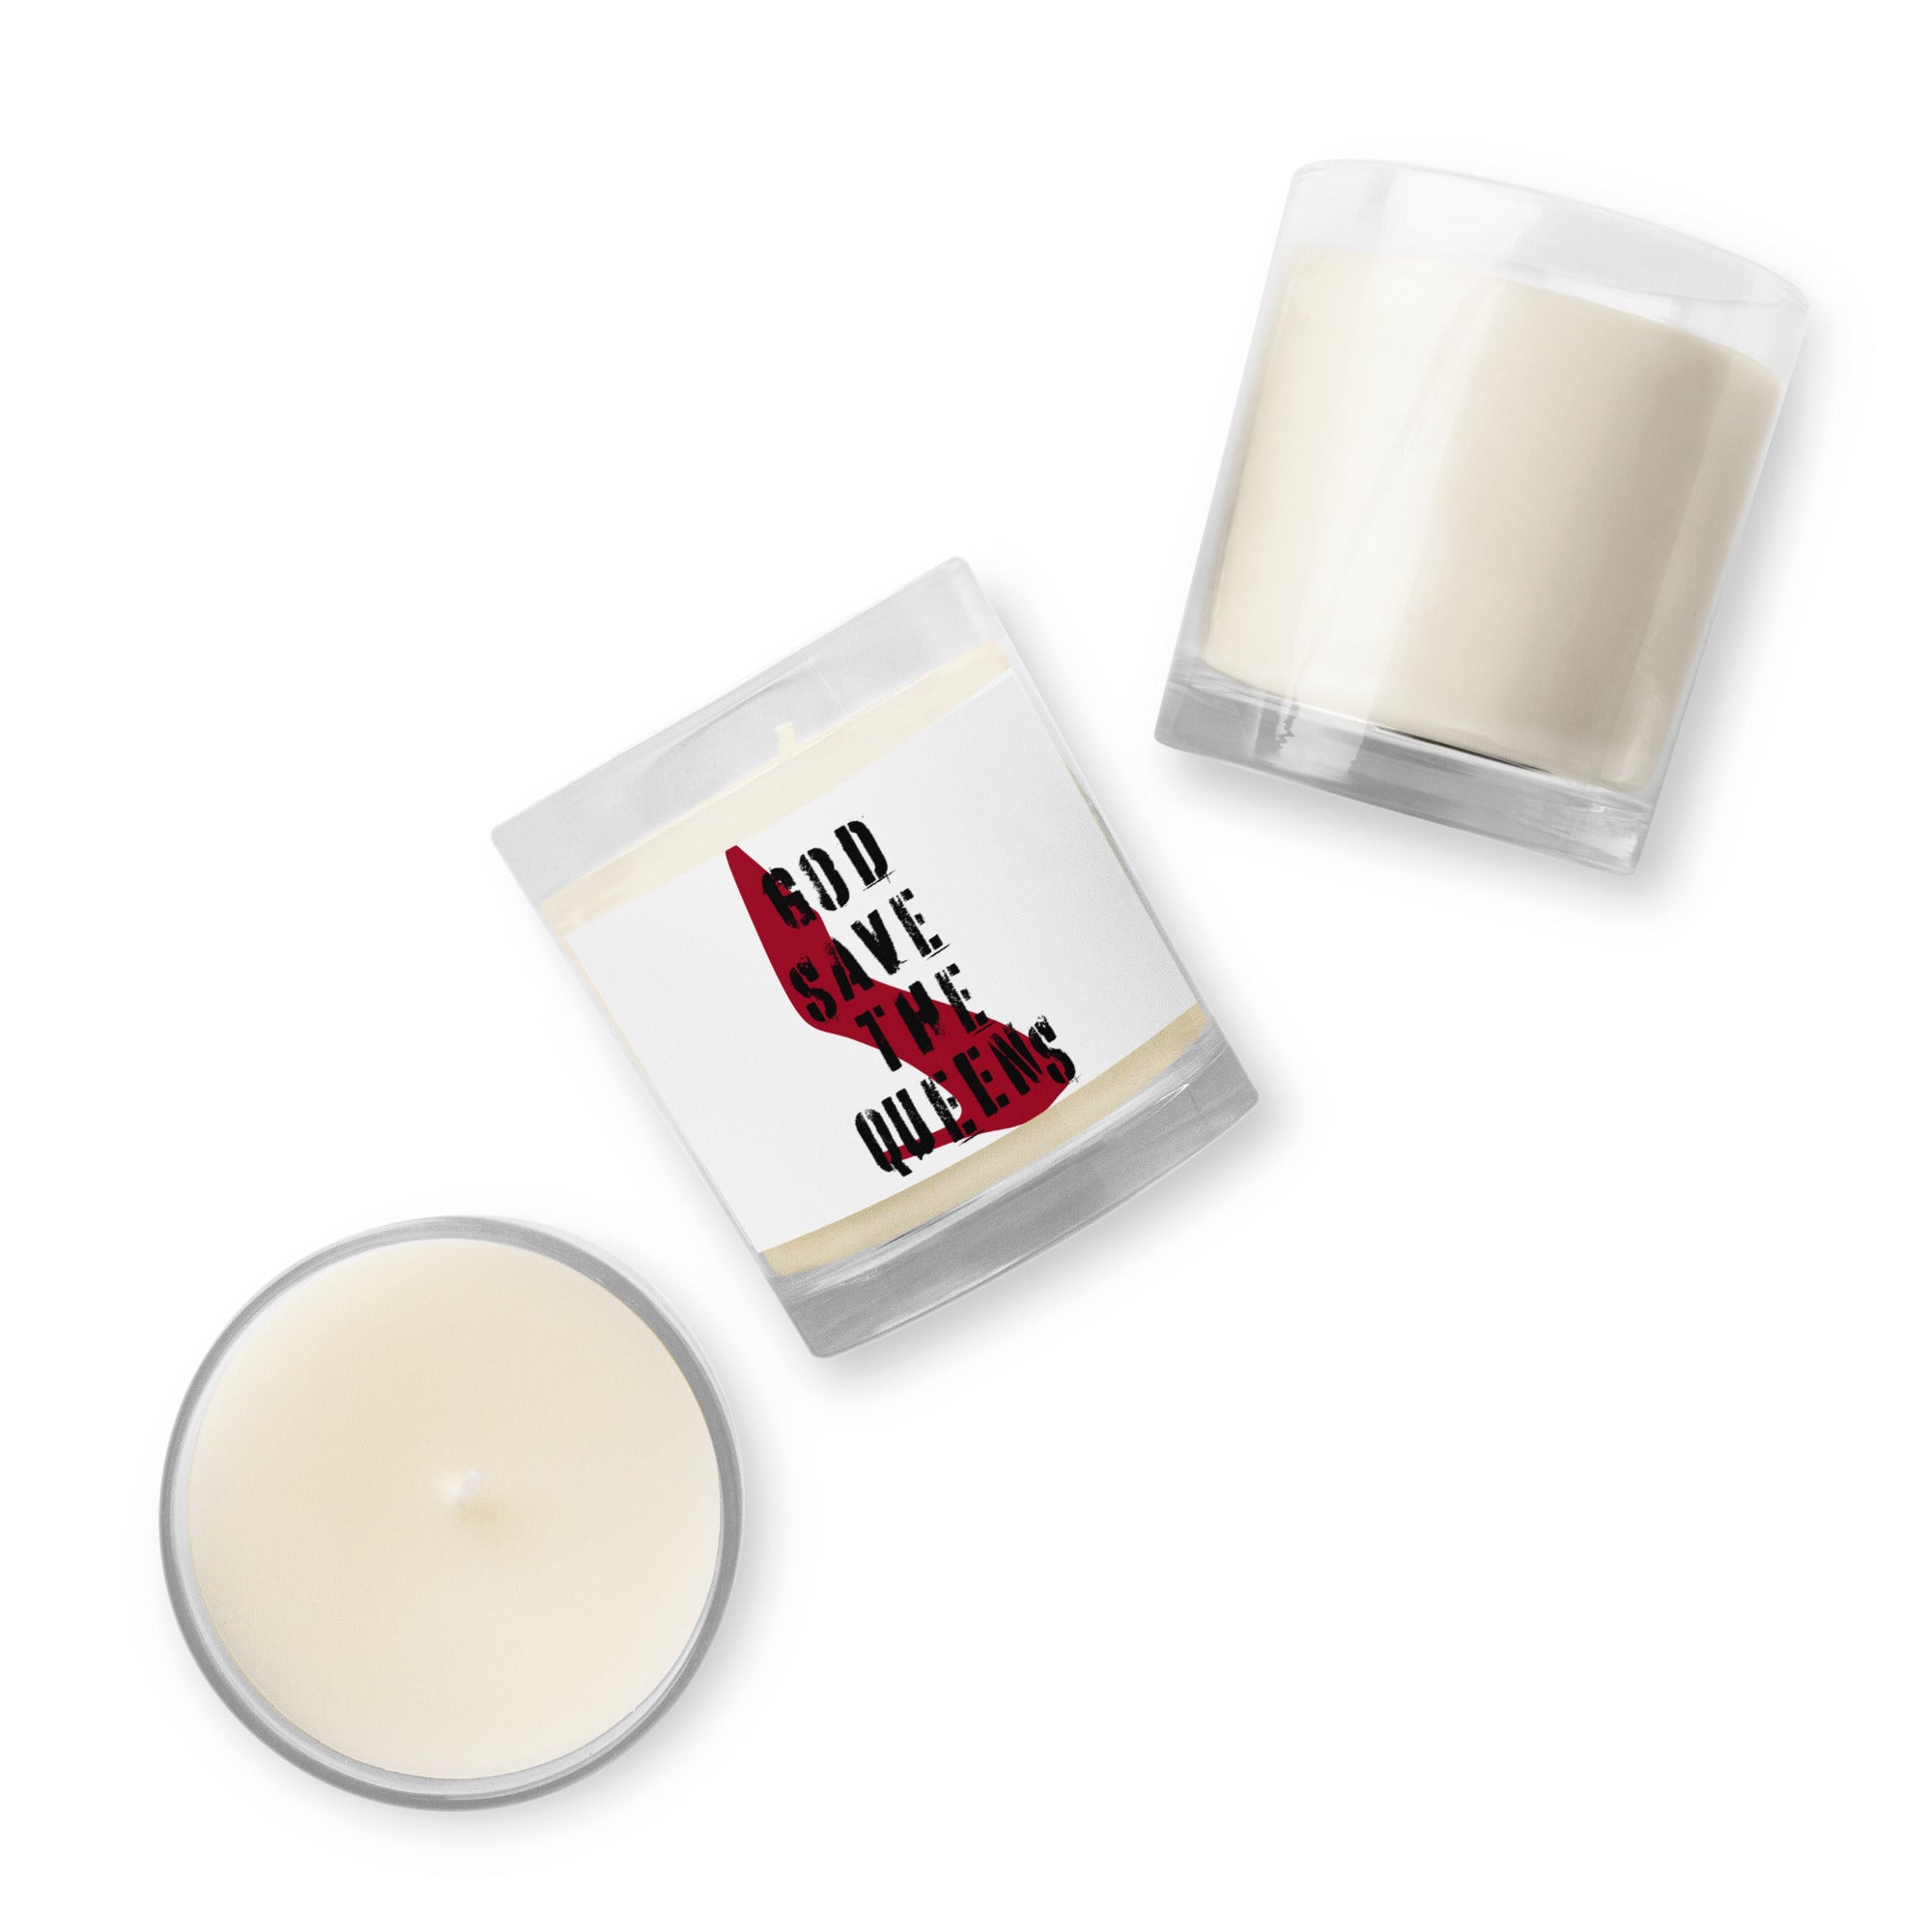 God Save the Queens Unscented Royal White candle